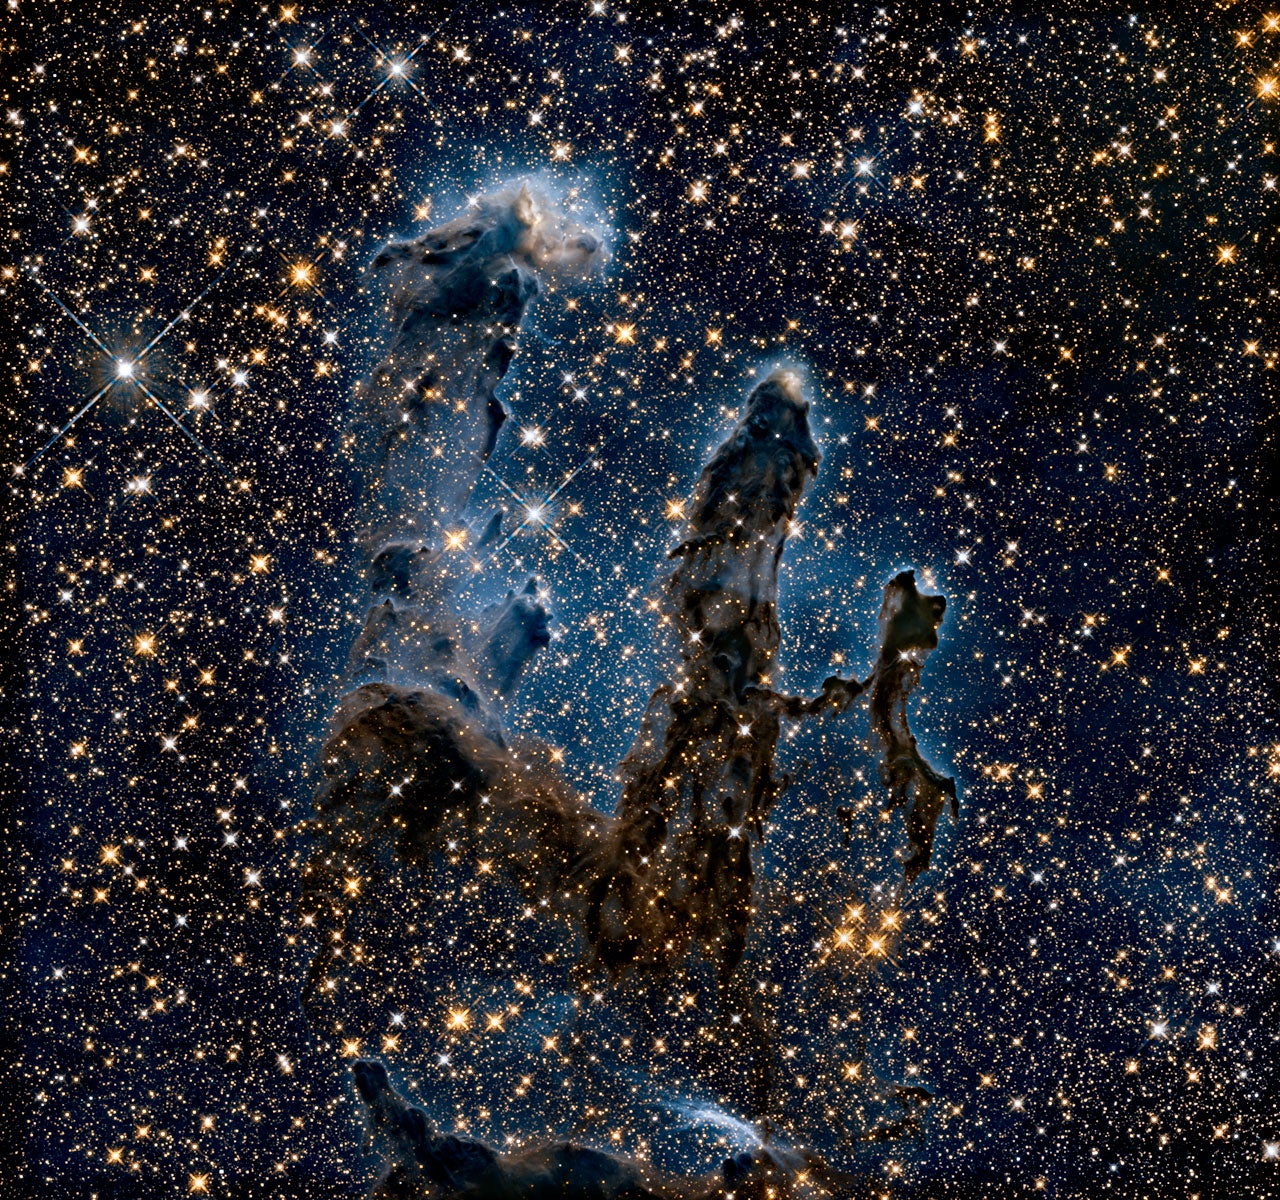 The Eagle Nebula's Pillars of Creation imaged in infrared light.